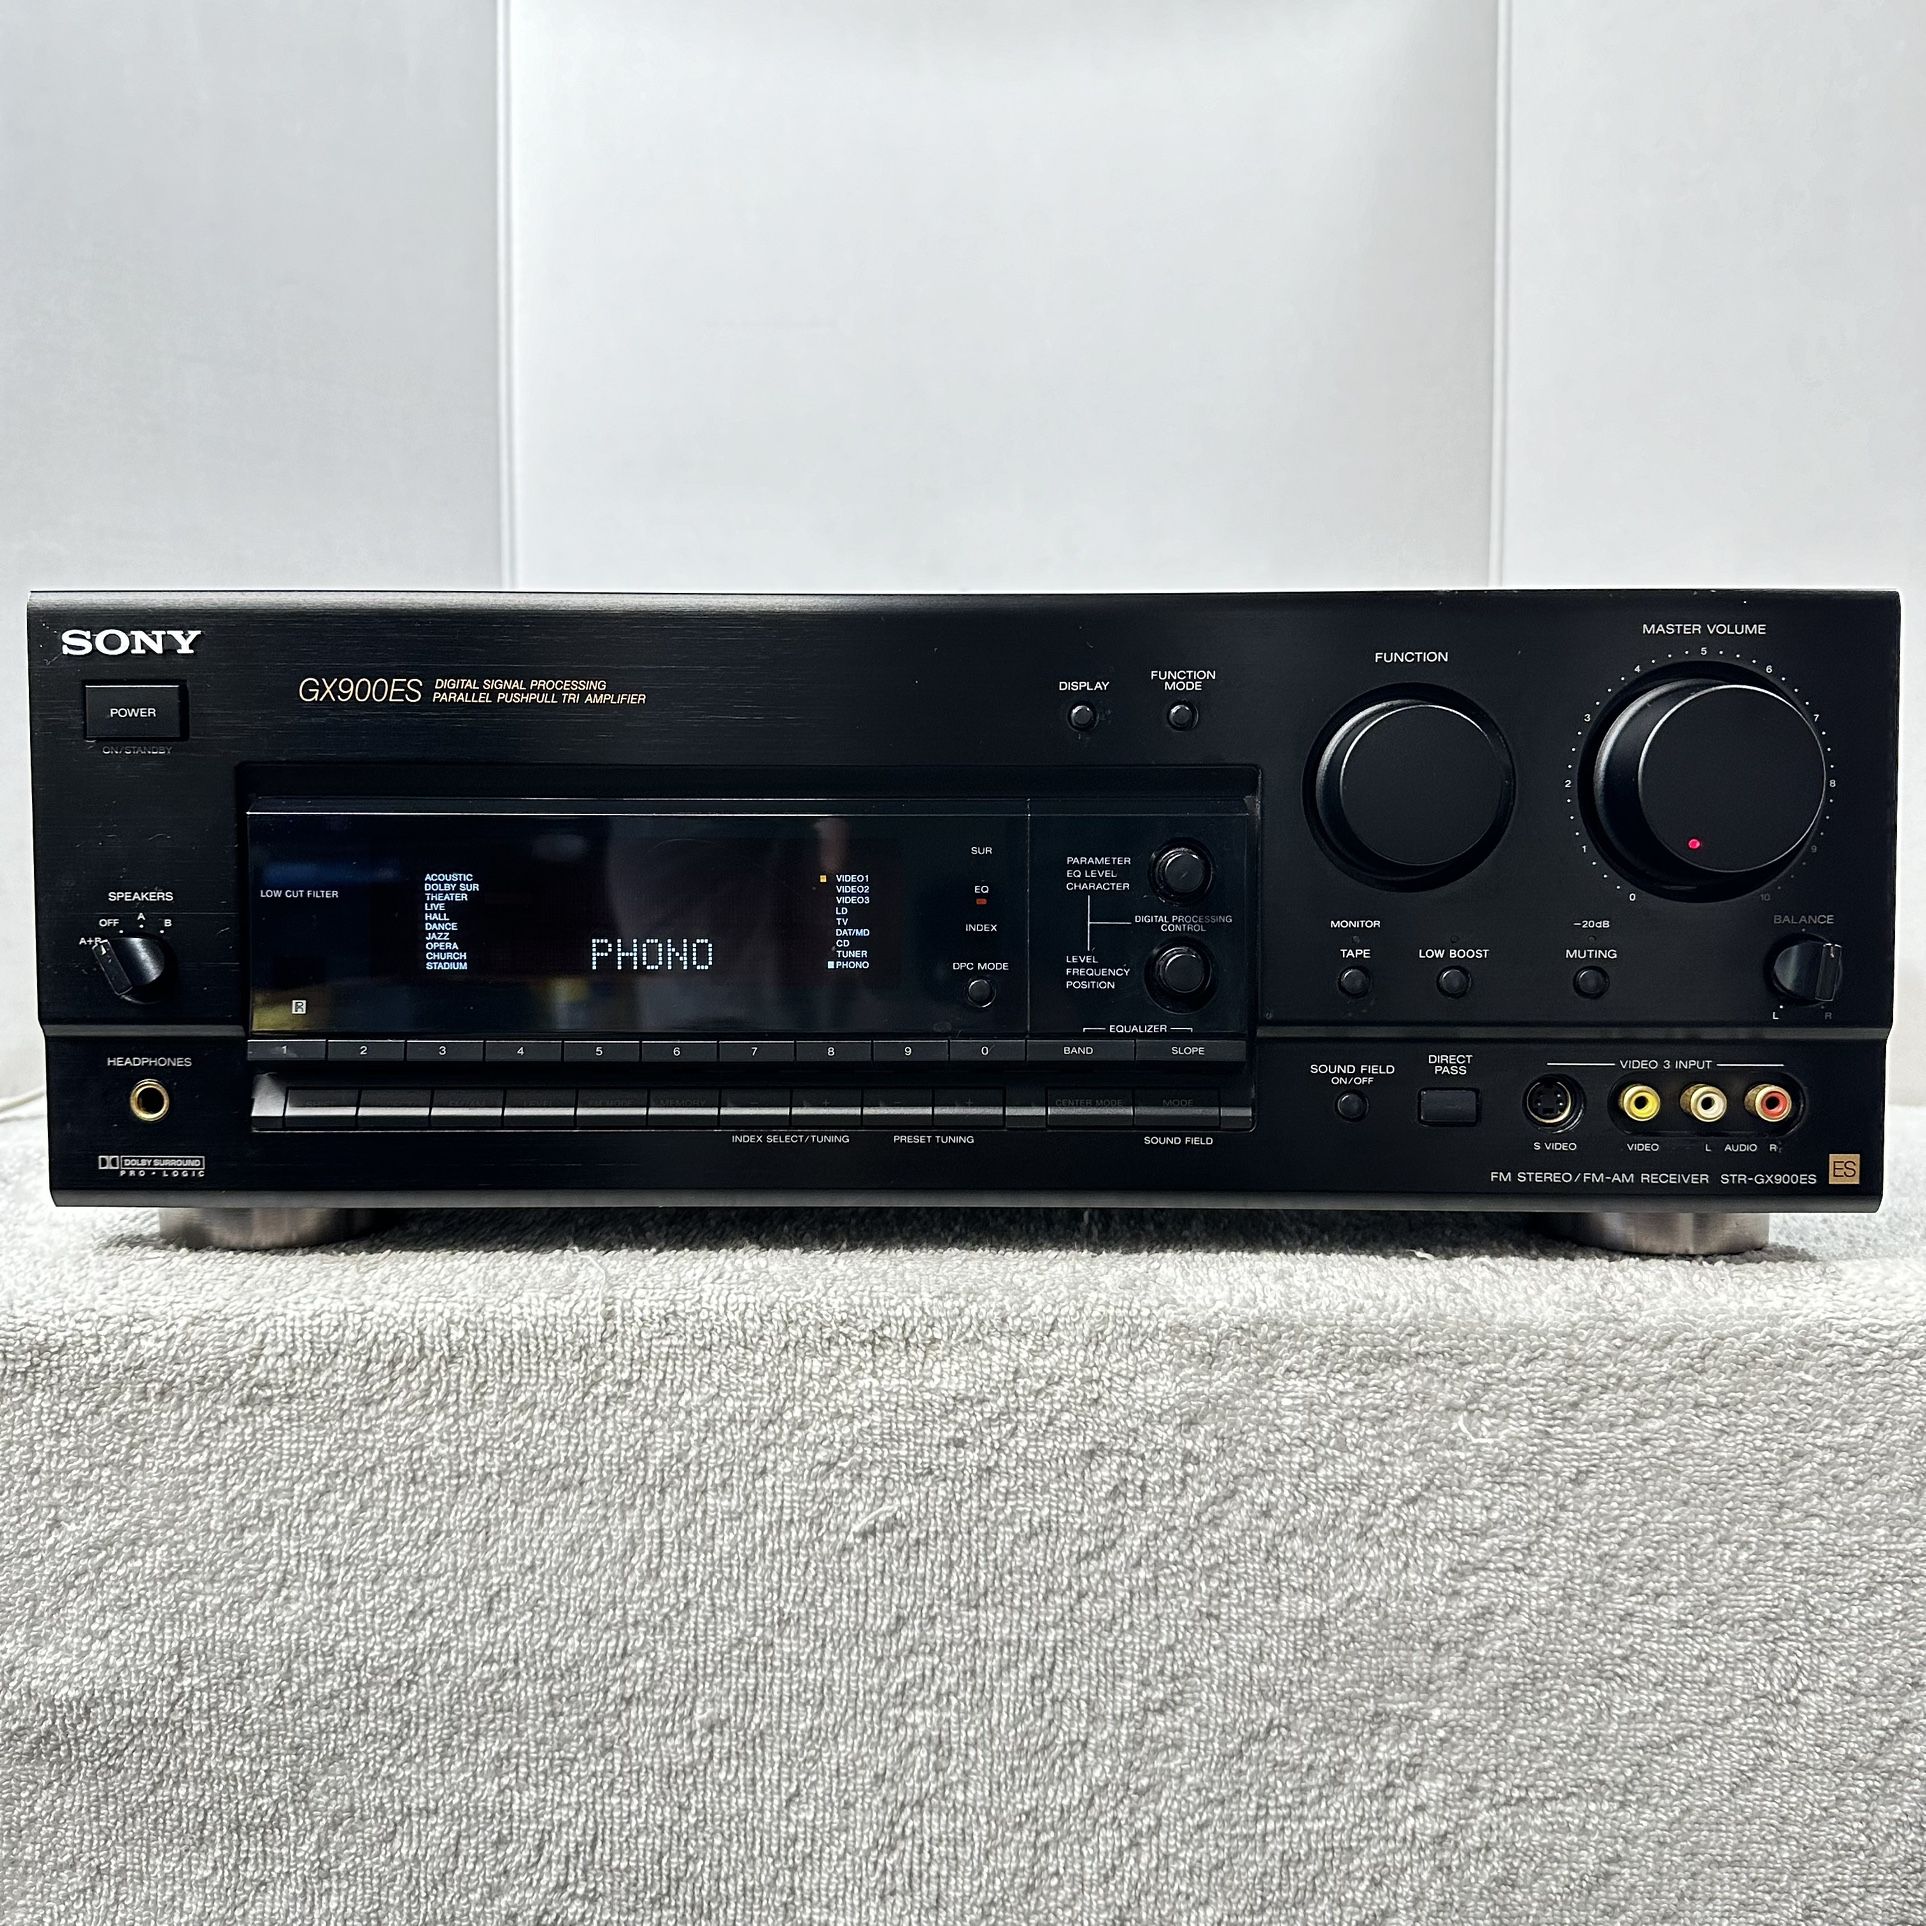 Sony’s Best—ES Series—5.1 Channel Surround Receiver—Very Rare—This is My Last ES Series For Sale—TESTED—Good Condition and Great Sound